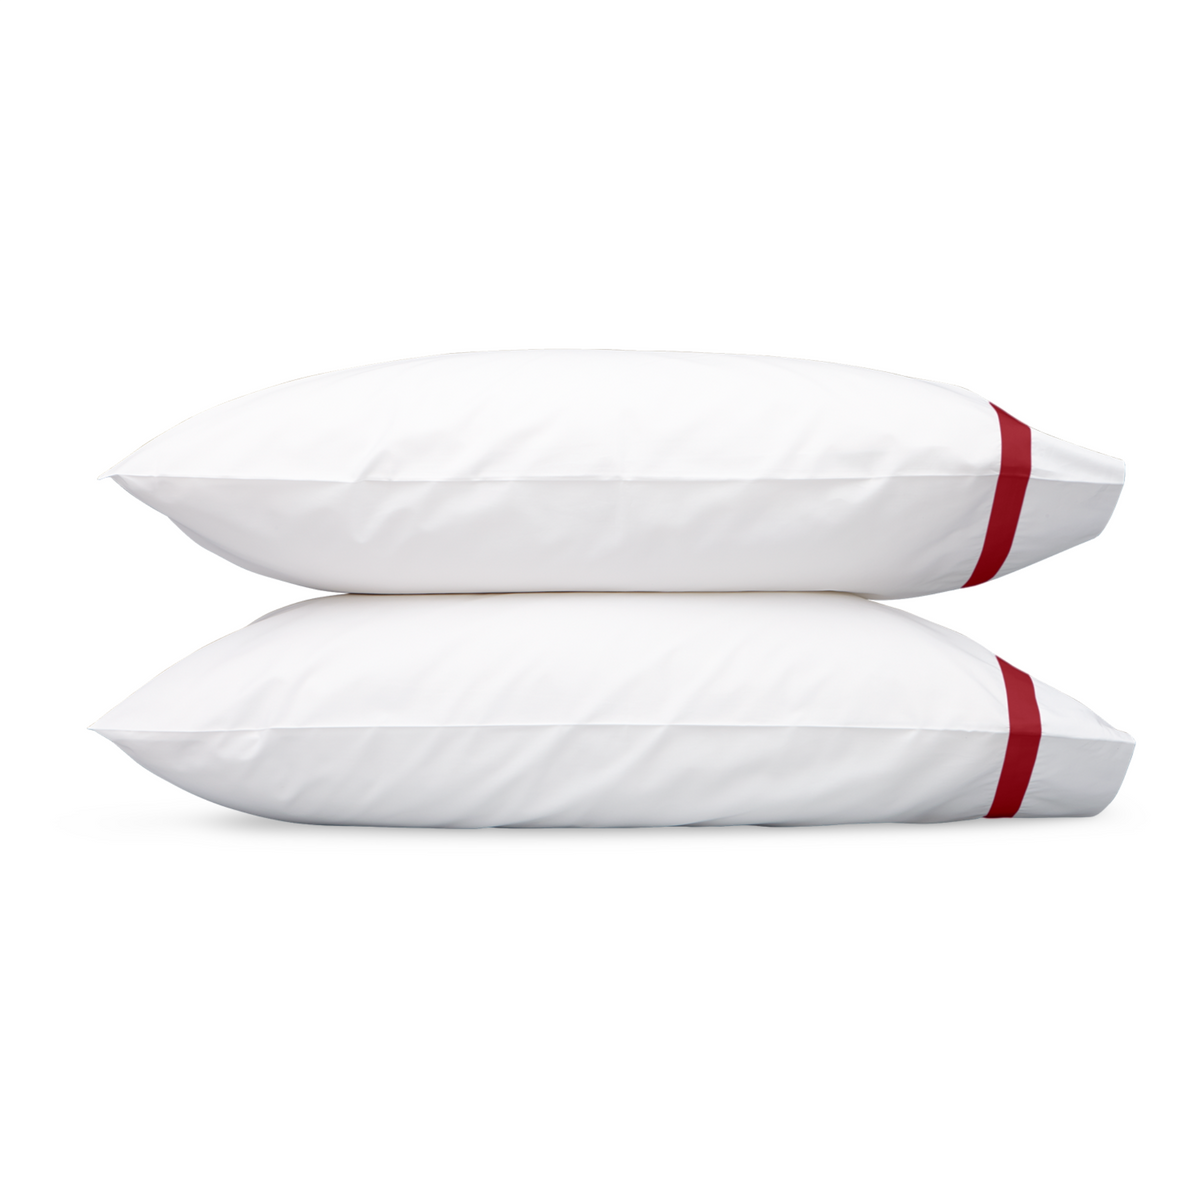 A Pair of Matouk Lowell Bedding Pillowcases in Scarlet Color